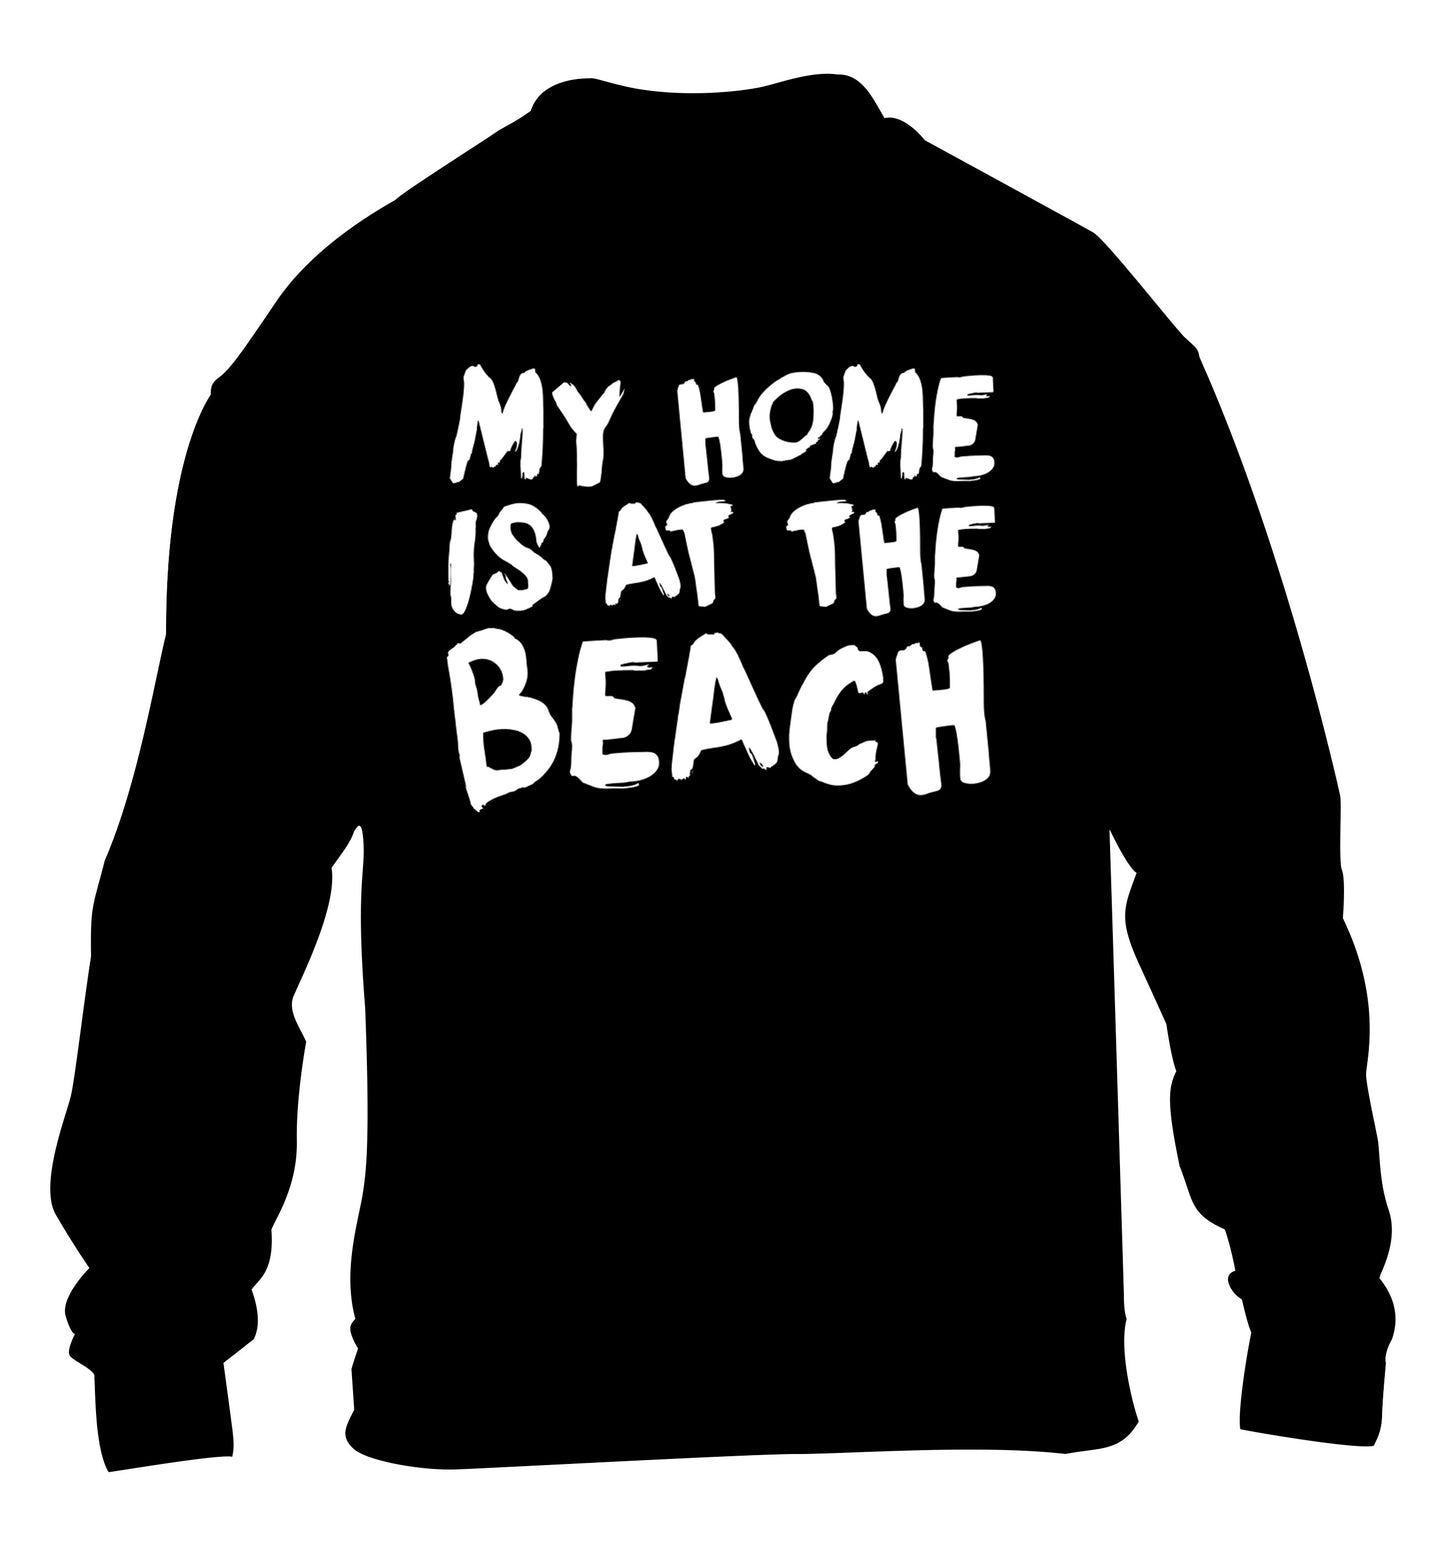 My home is at the beach children's black sweater 12-14 Years